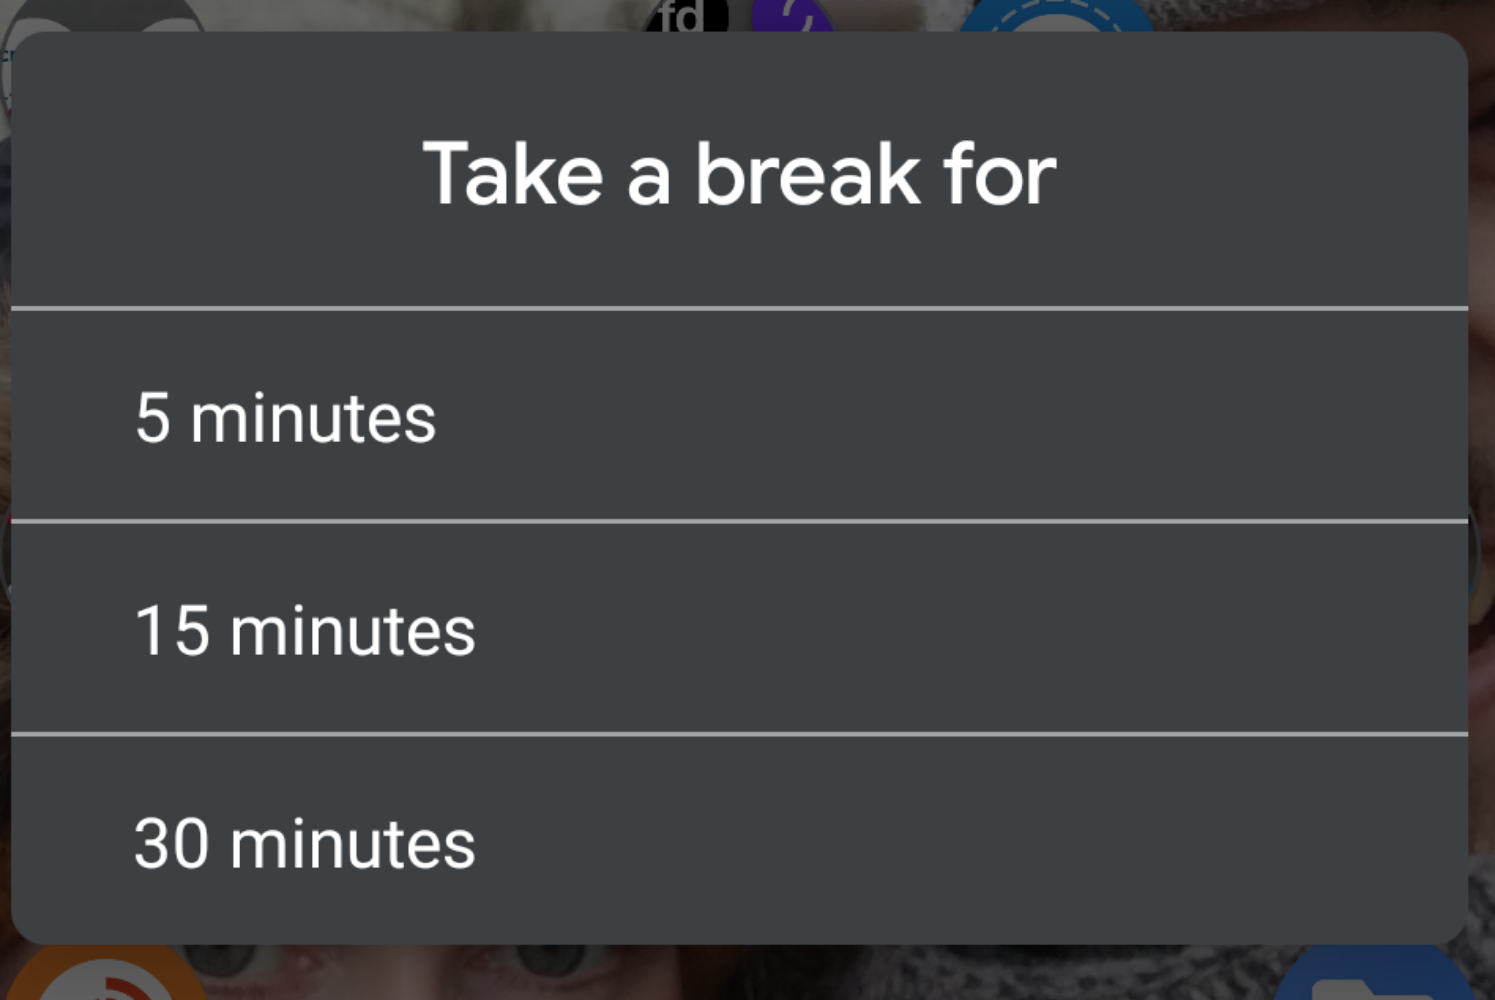 Popup to allow taking a break from Focus Mode for 5, 15 or 30 minutes 